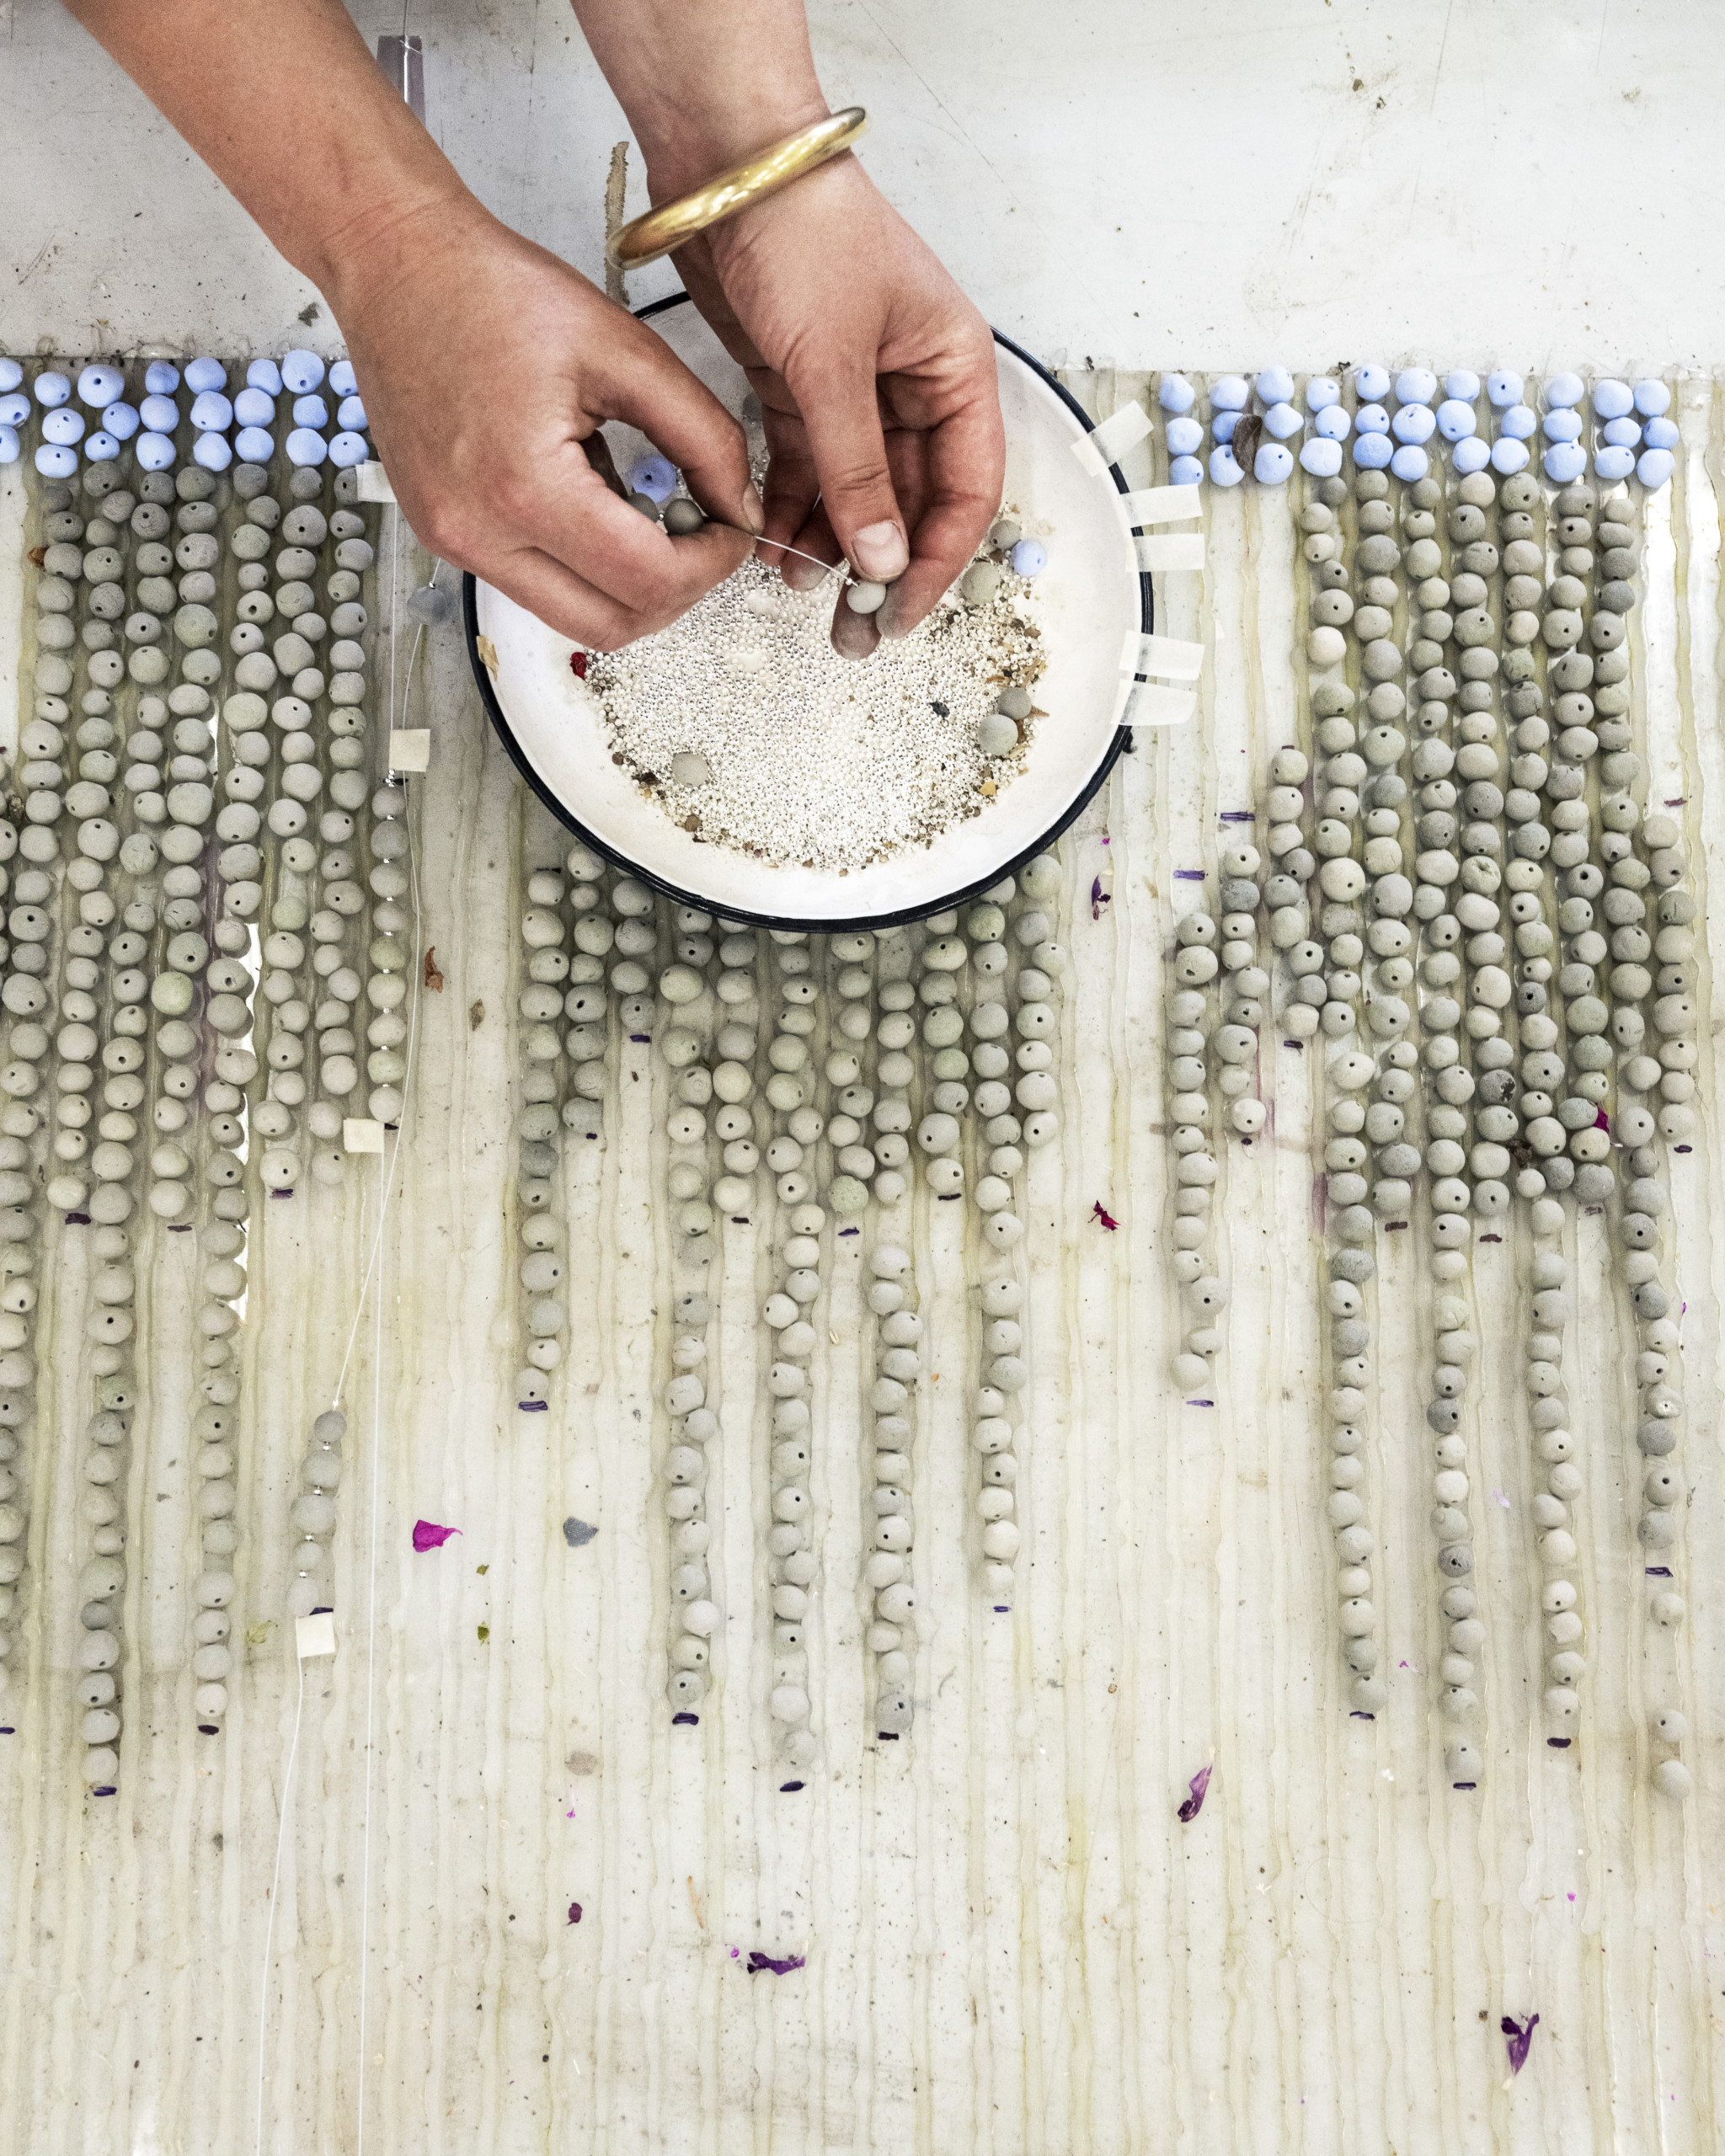 Artist Zoë Paul at work with ceramic beads. All photography courtesy of diptyque Paris.